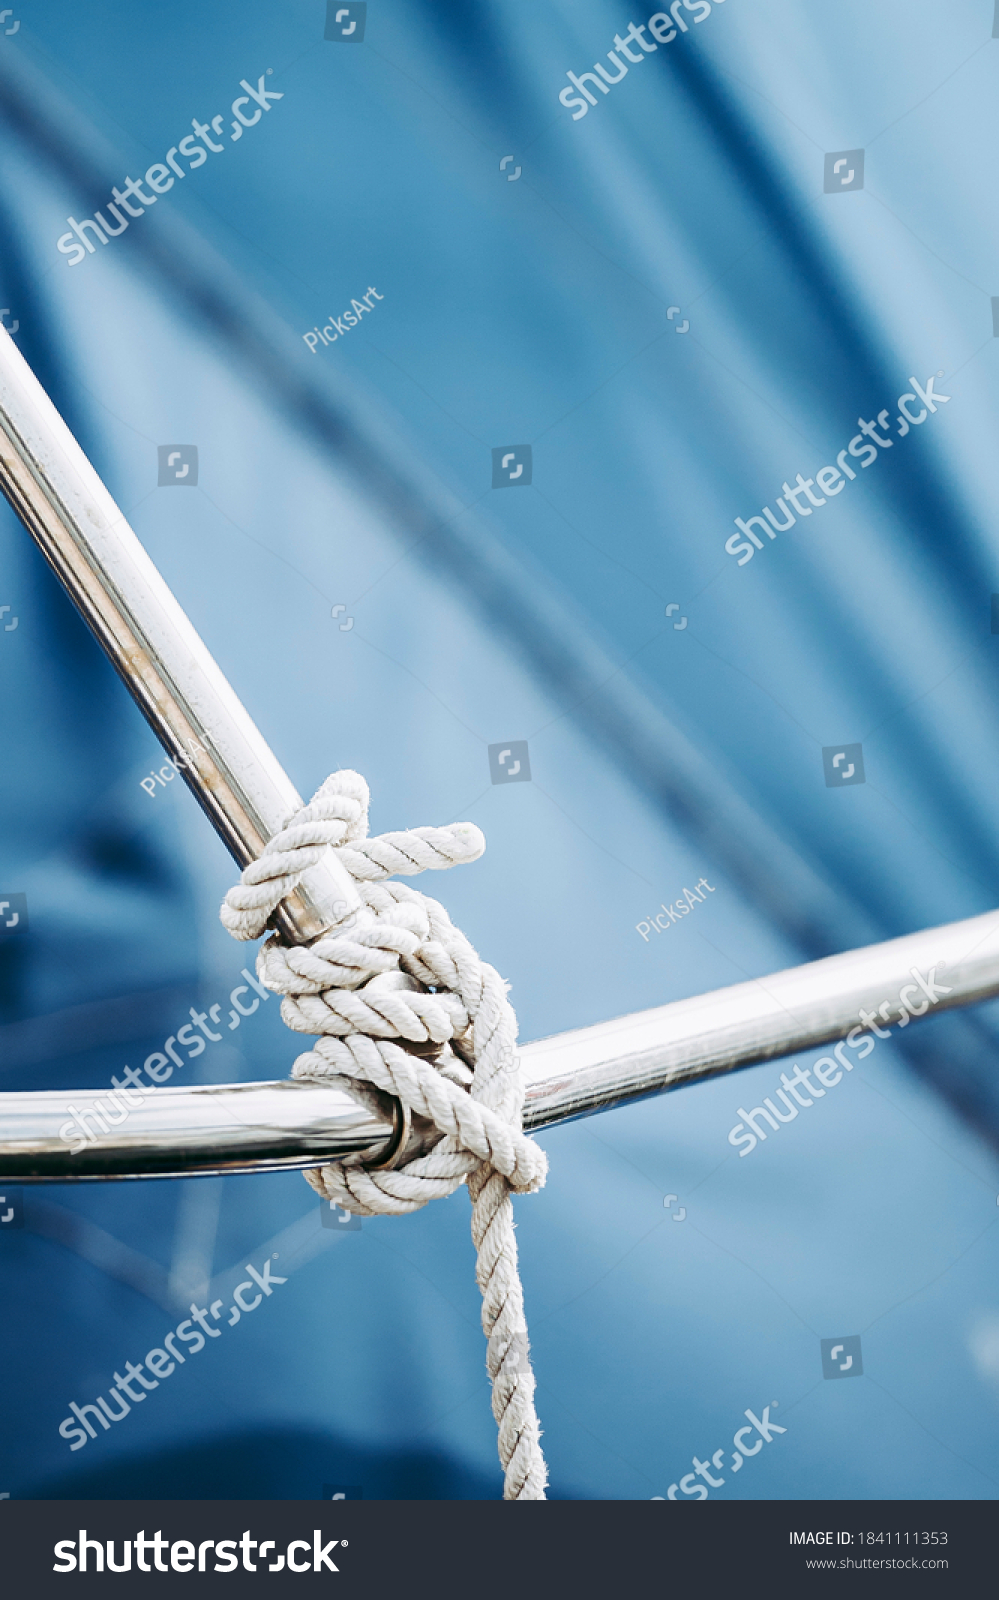 Ropes on a boat - Sailor's knot #1841111353